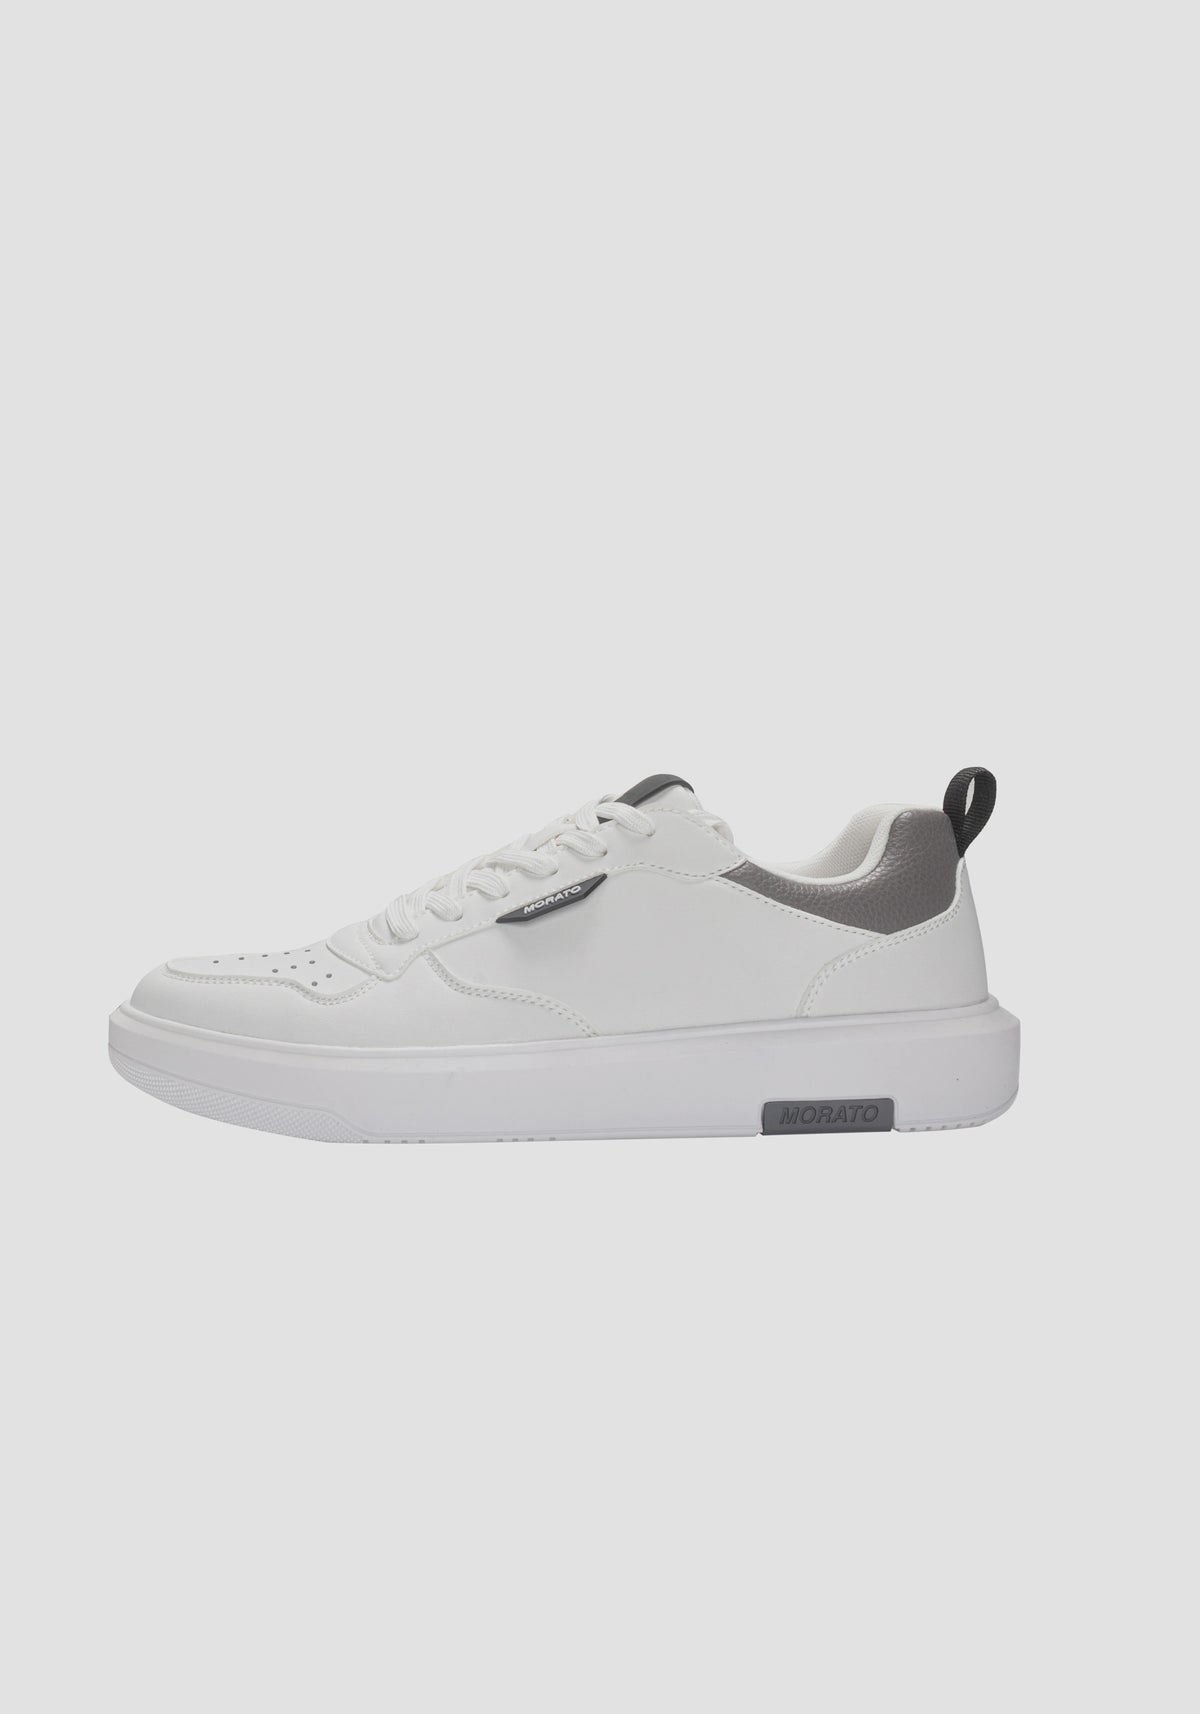 SNEAKER-MAYON-IN-SOFT-TOUCH-EF-WHITE